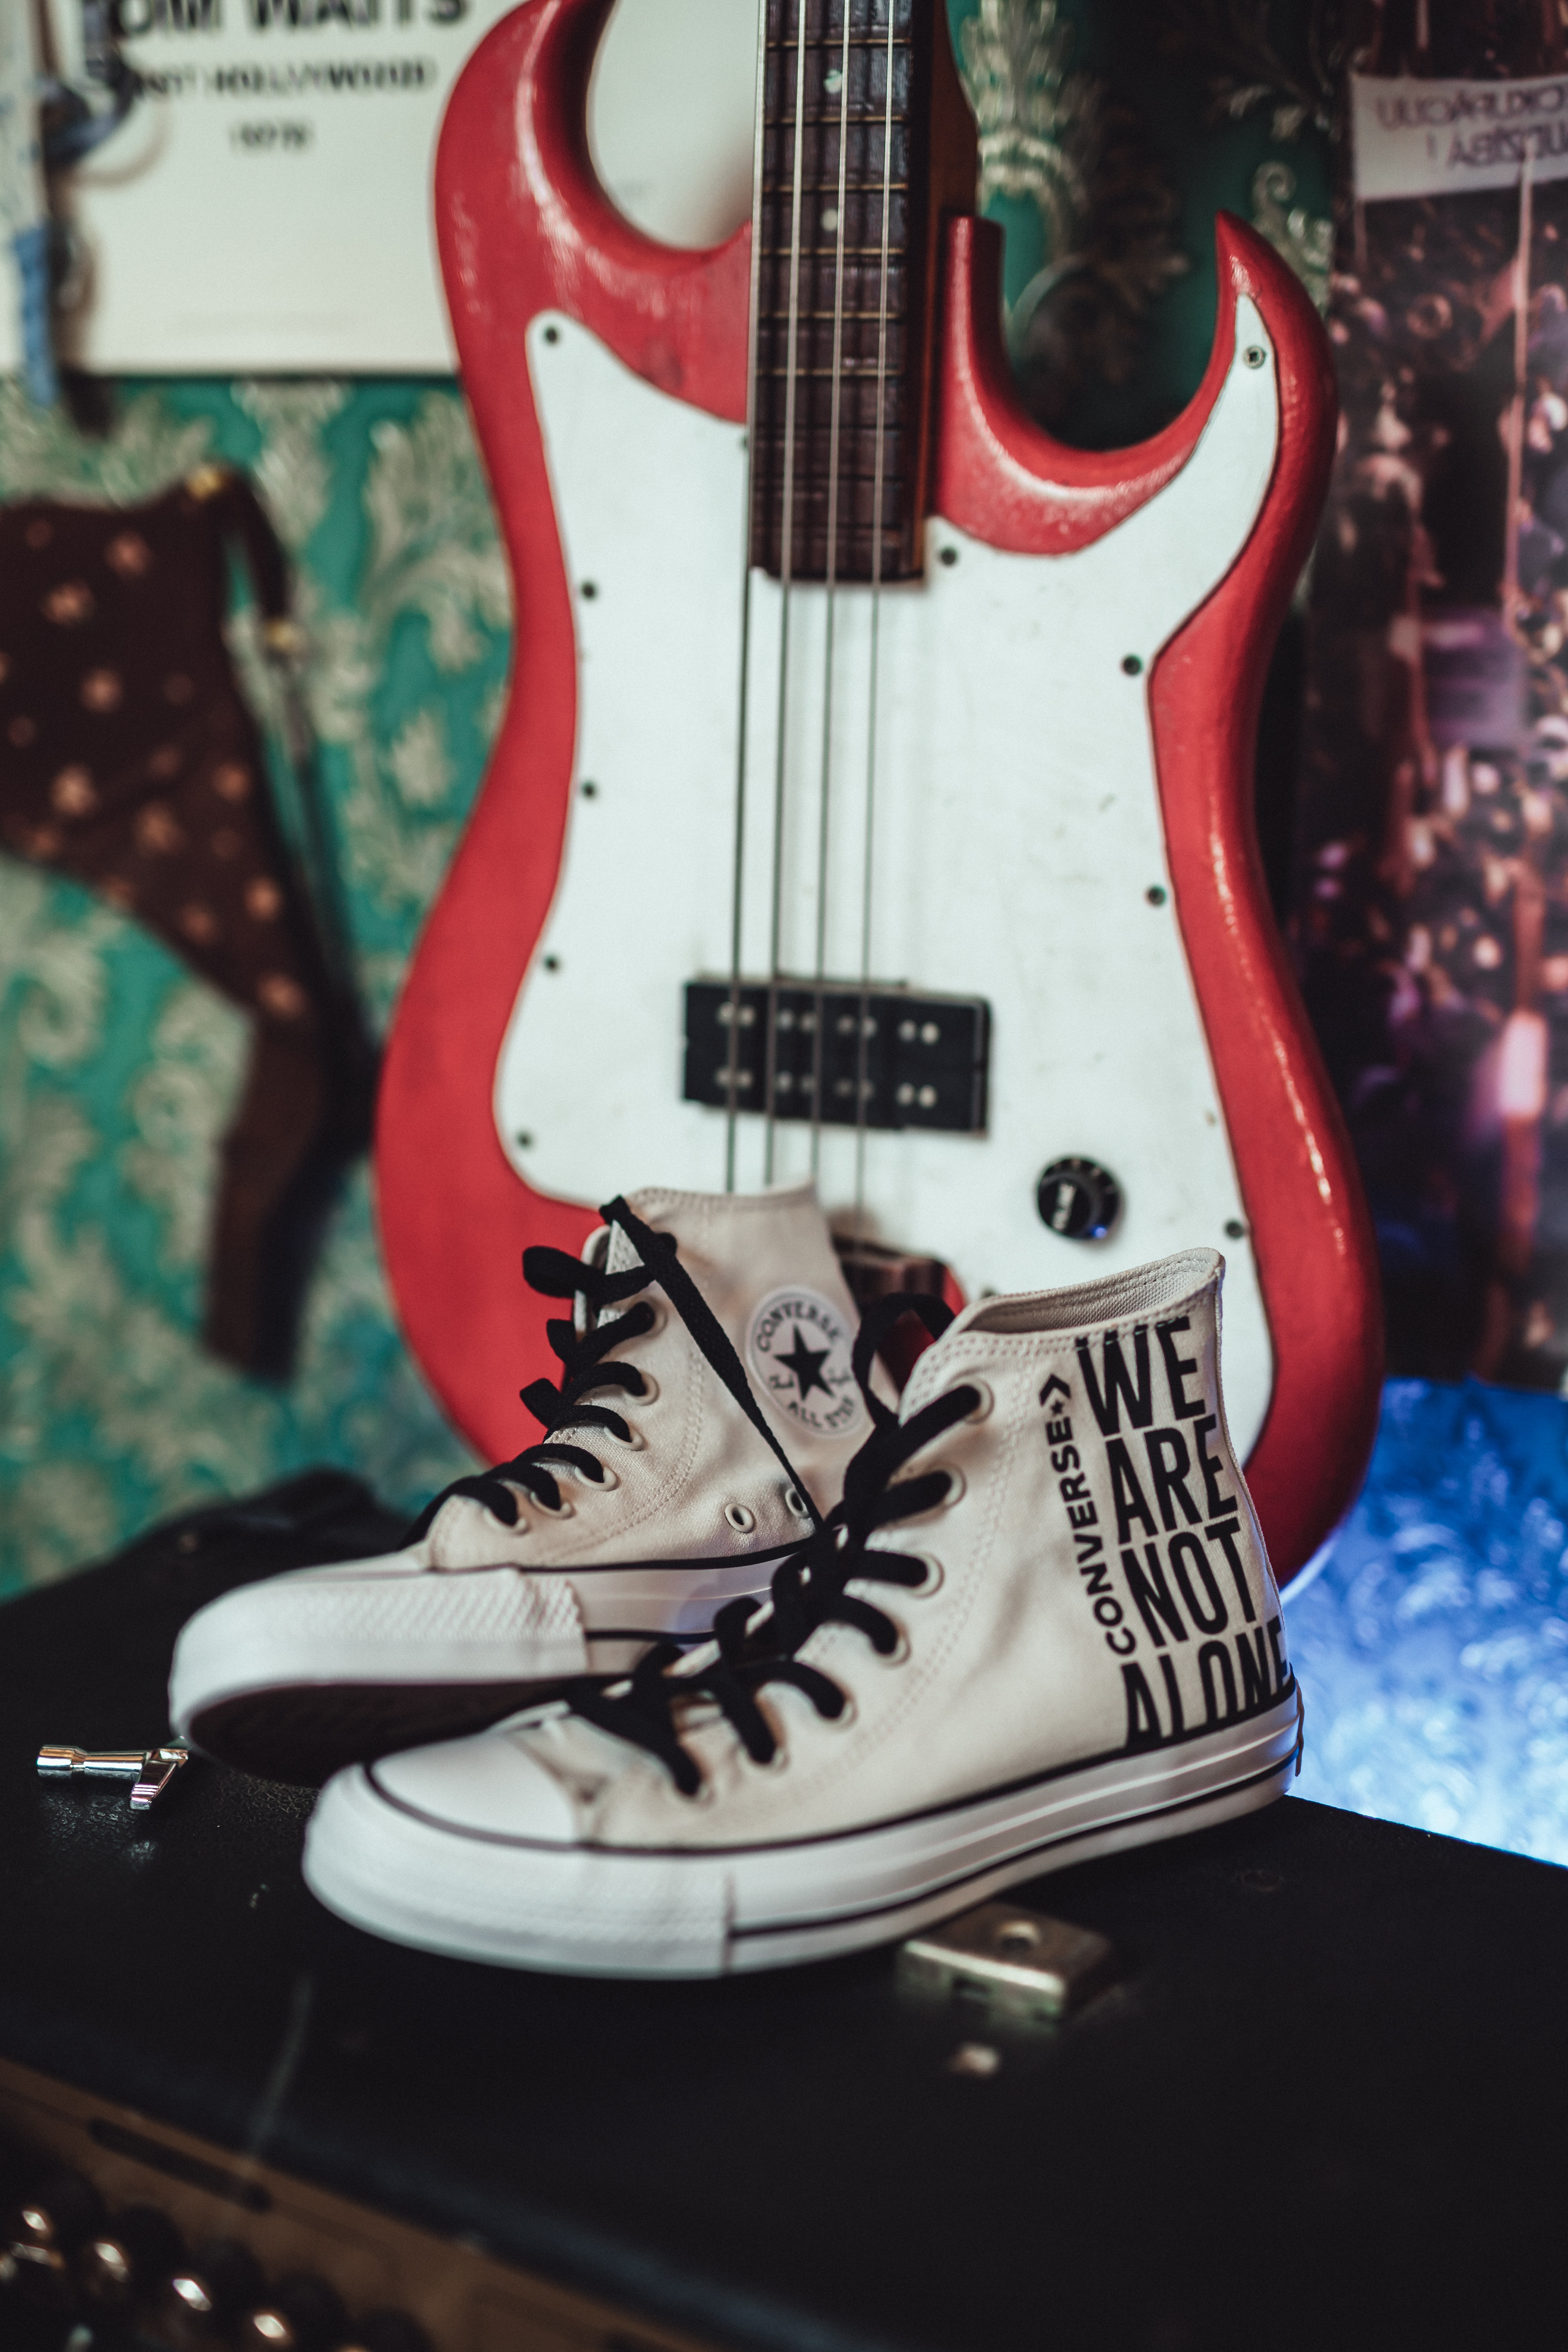 shoes, miscellanea, miscellaneous, sneakers, guitar, style, footwear